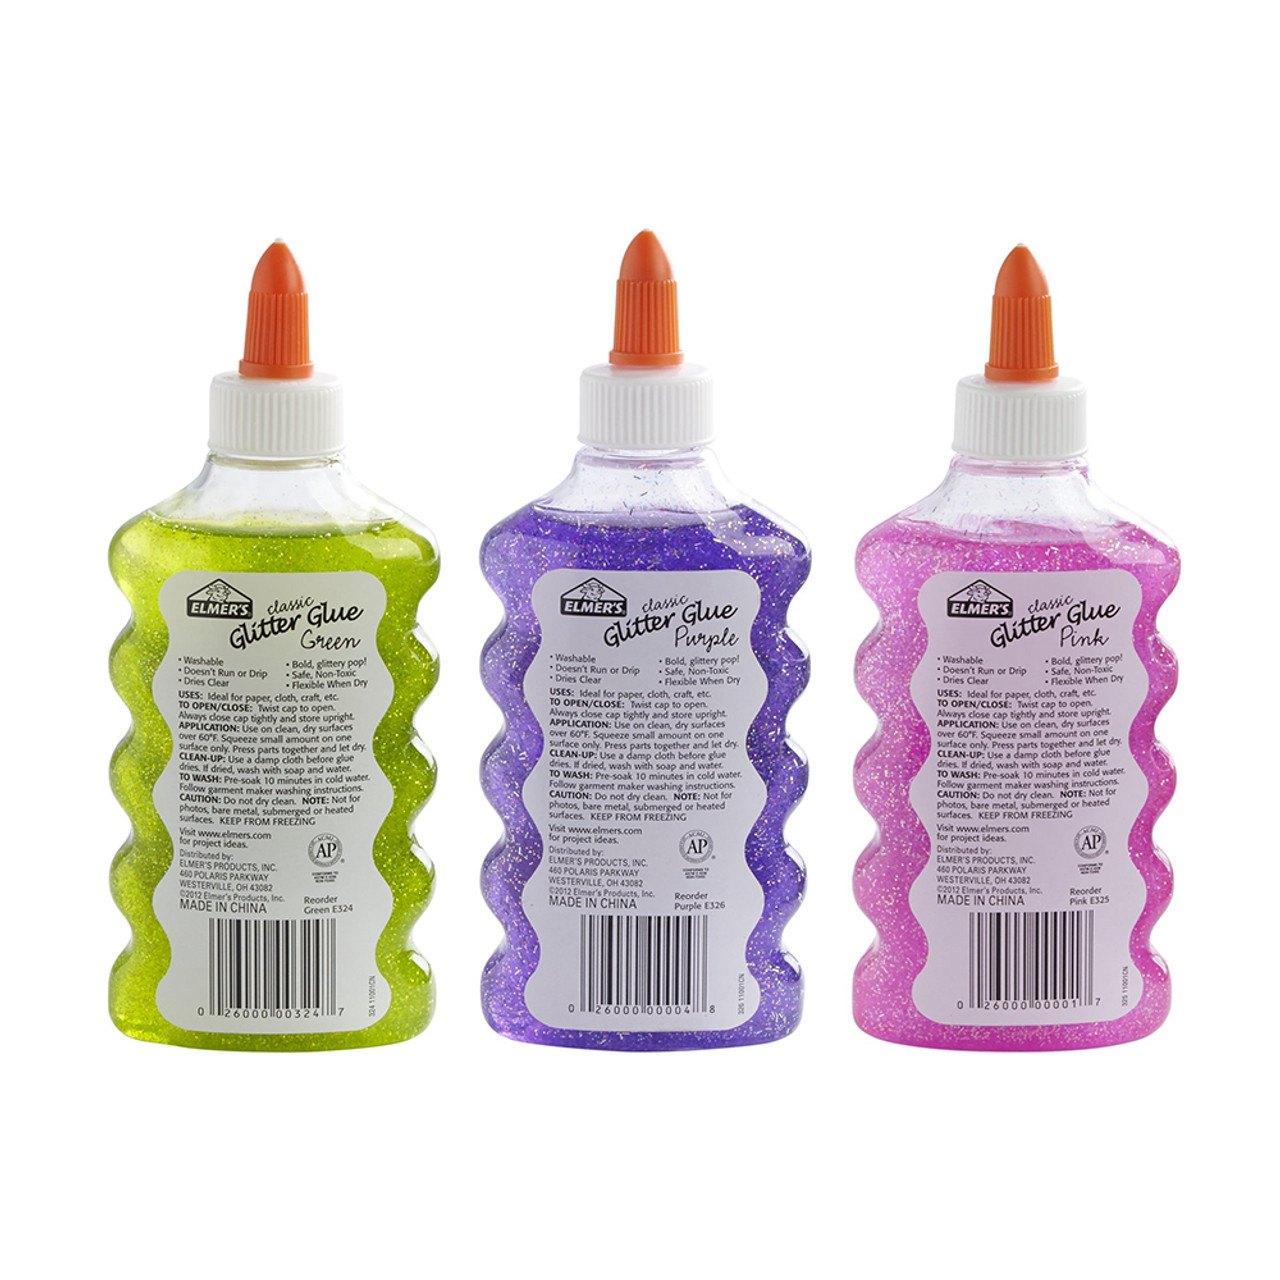 Young Artists - Elmers Classic Glitter Glue - Assorted Colors - 10 Pieces